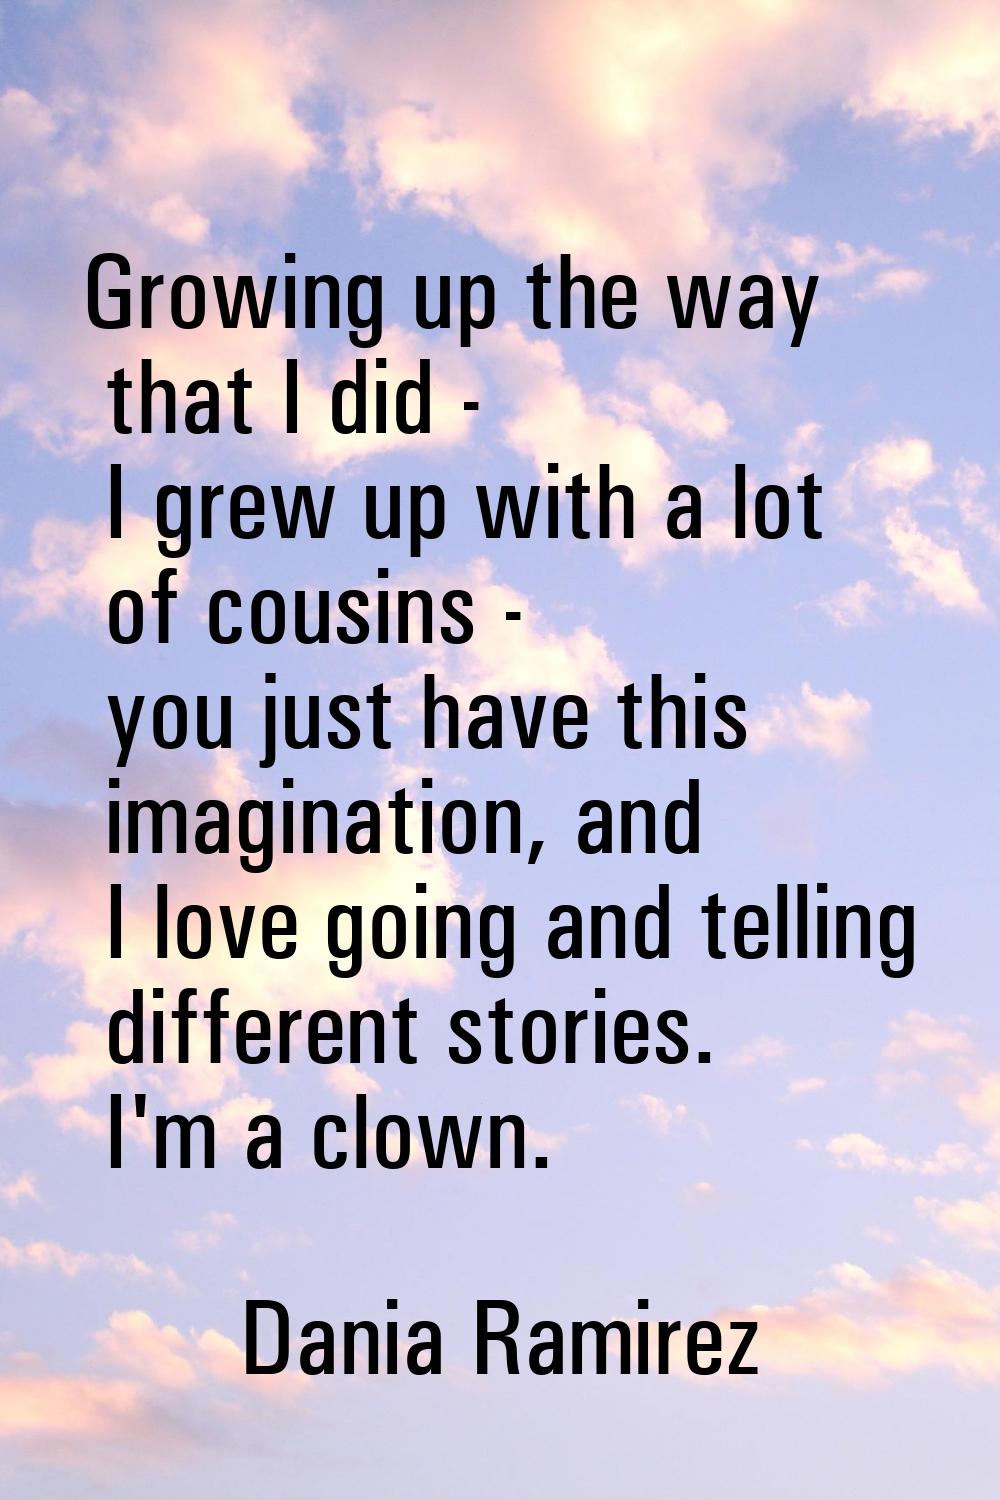 Growing up the way that I did - I grew up with a lot of cousins - you just have this imagination, a